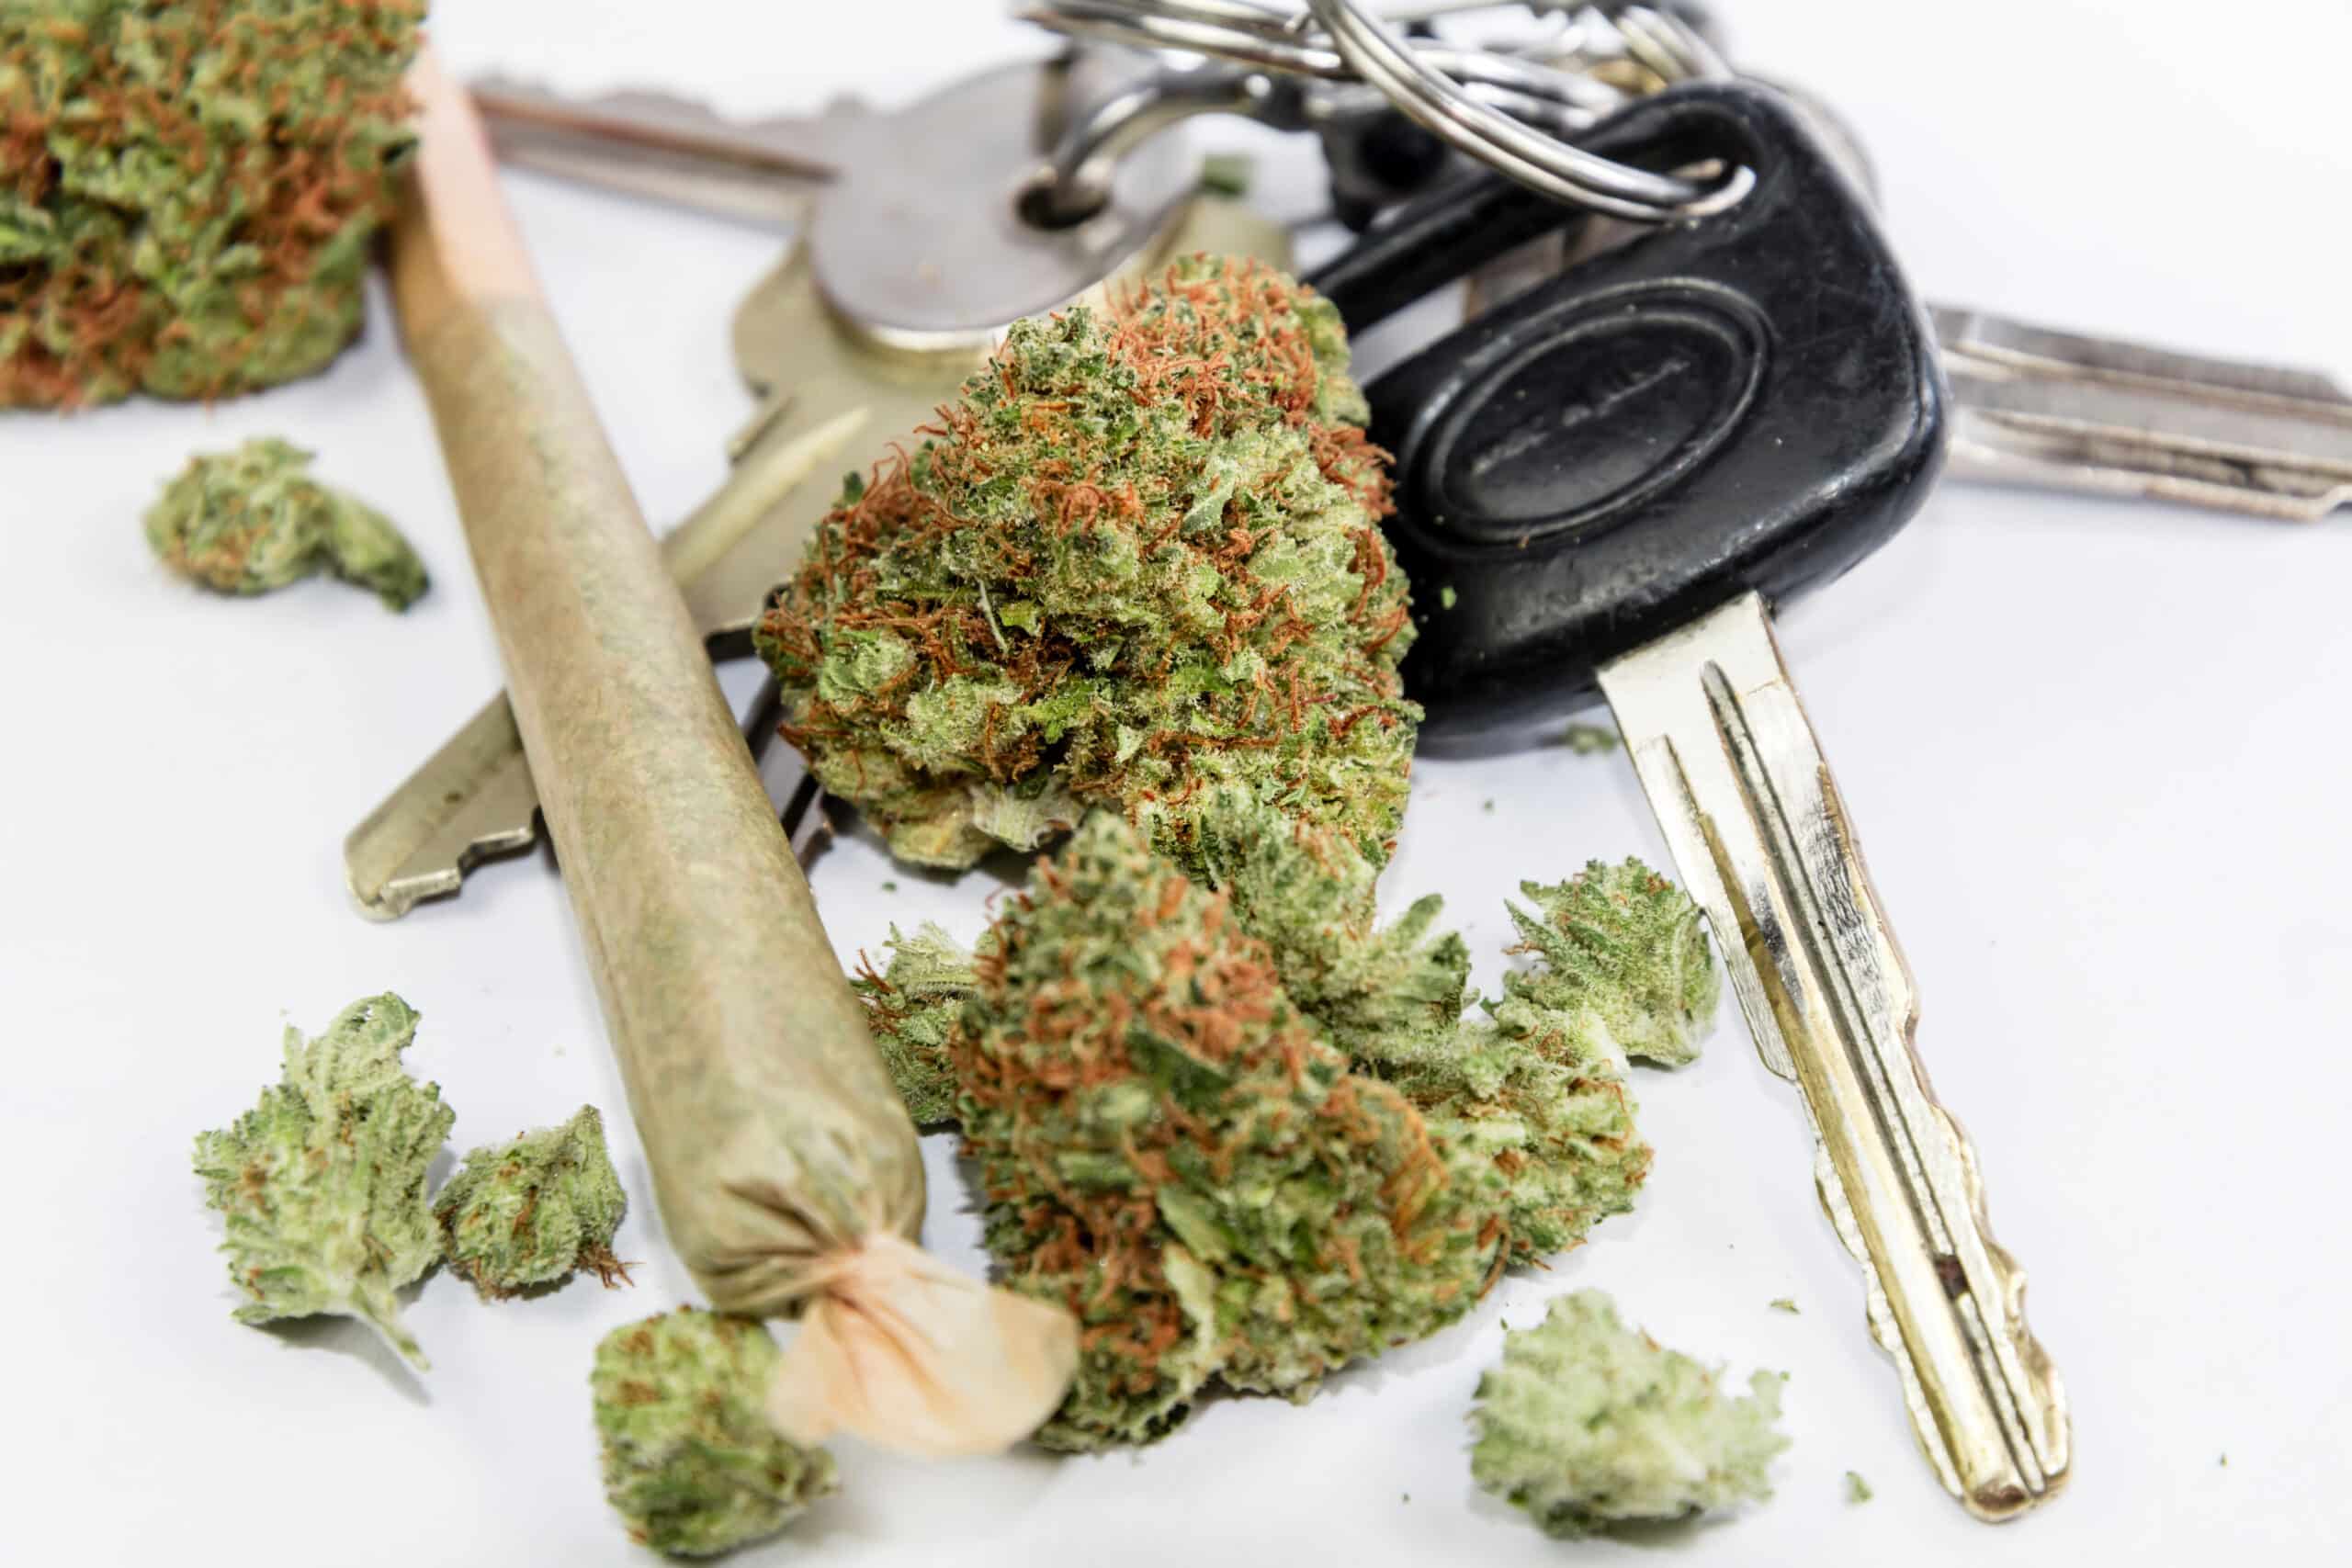 Marijuana and Driving - Don’t Drive High - Car Keys and Cannabis representing other types of DUI.